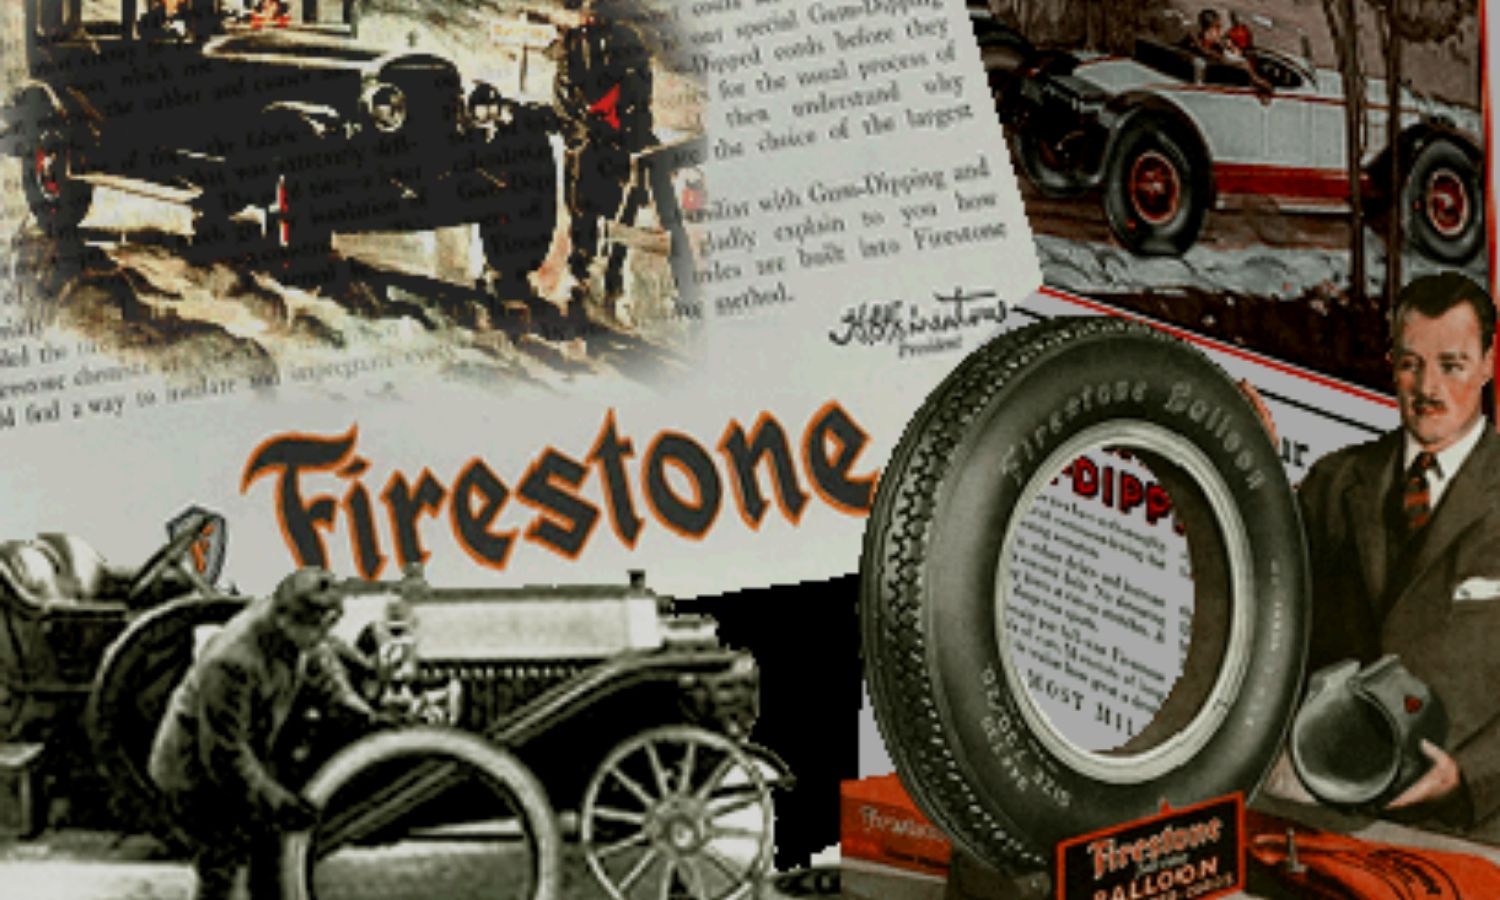 OTD in 1923: The Firestone Tire and Rubber Company started selling inflatable tires from Akron